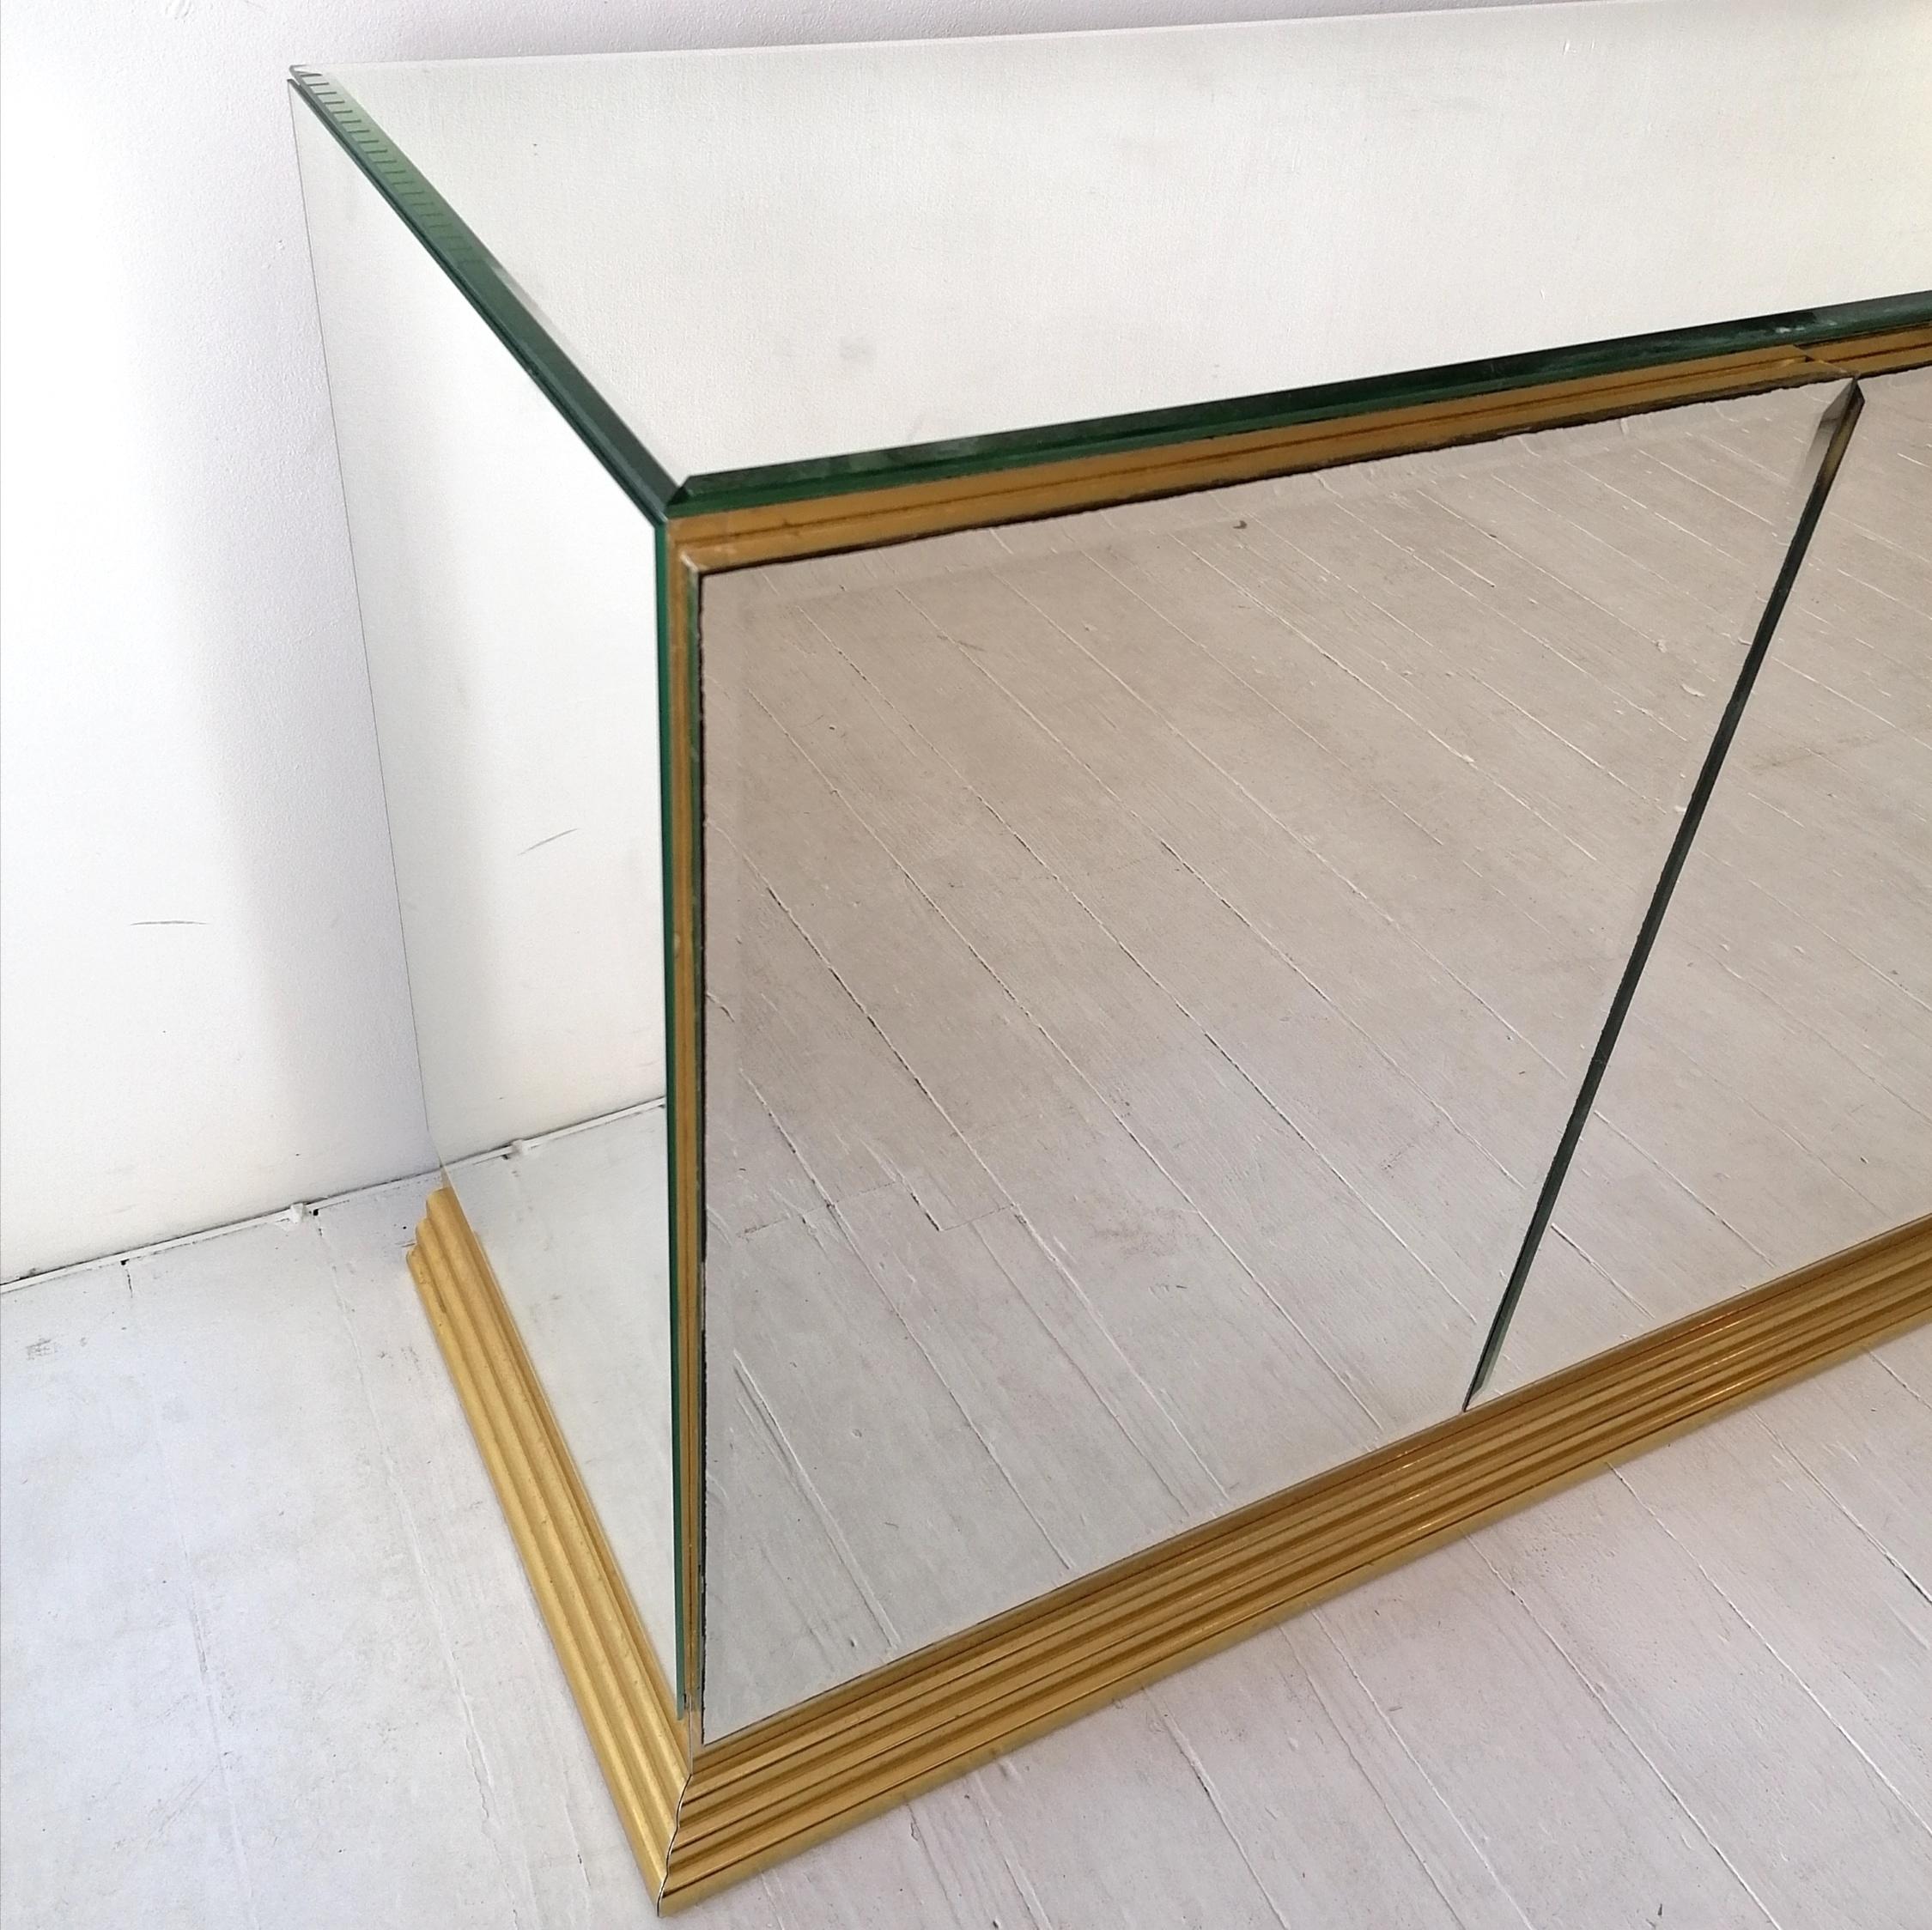 Vintage Mirrored Sideboard with Brass Base, by Ello Furniture USA, 1970s / 80s 2